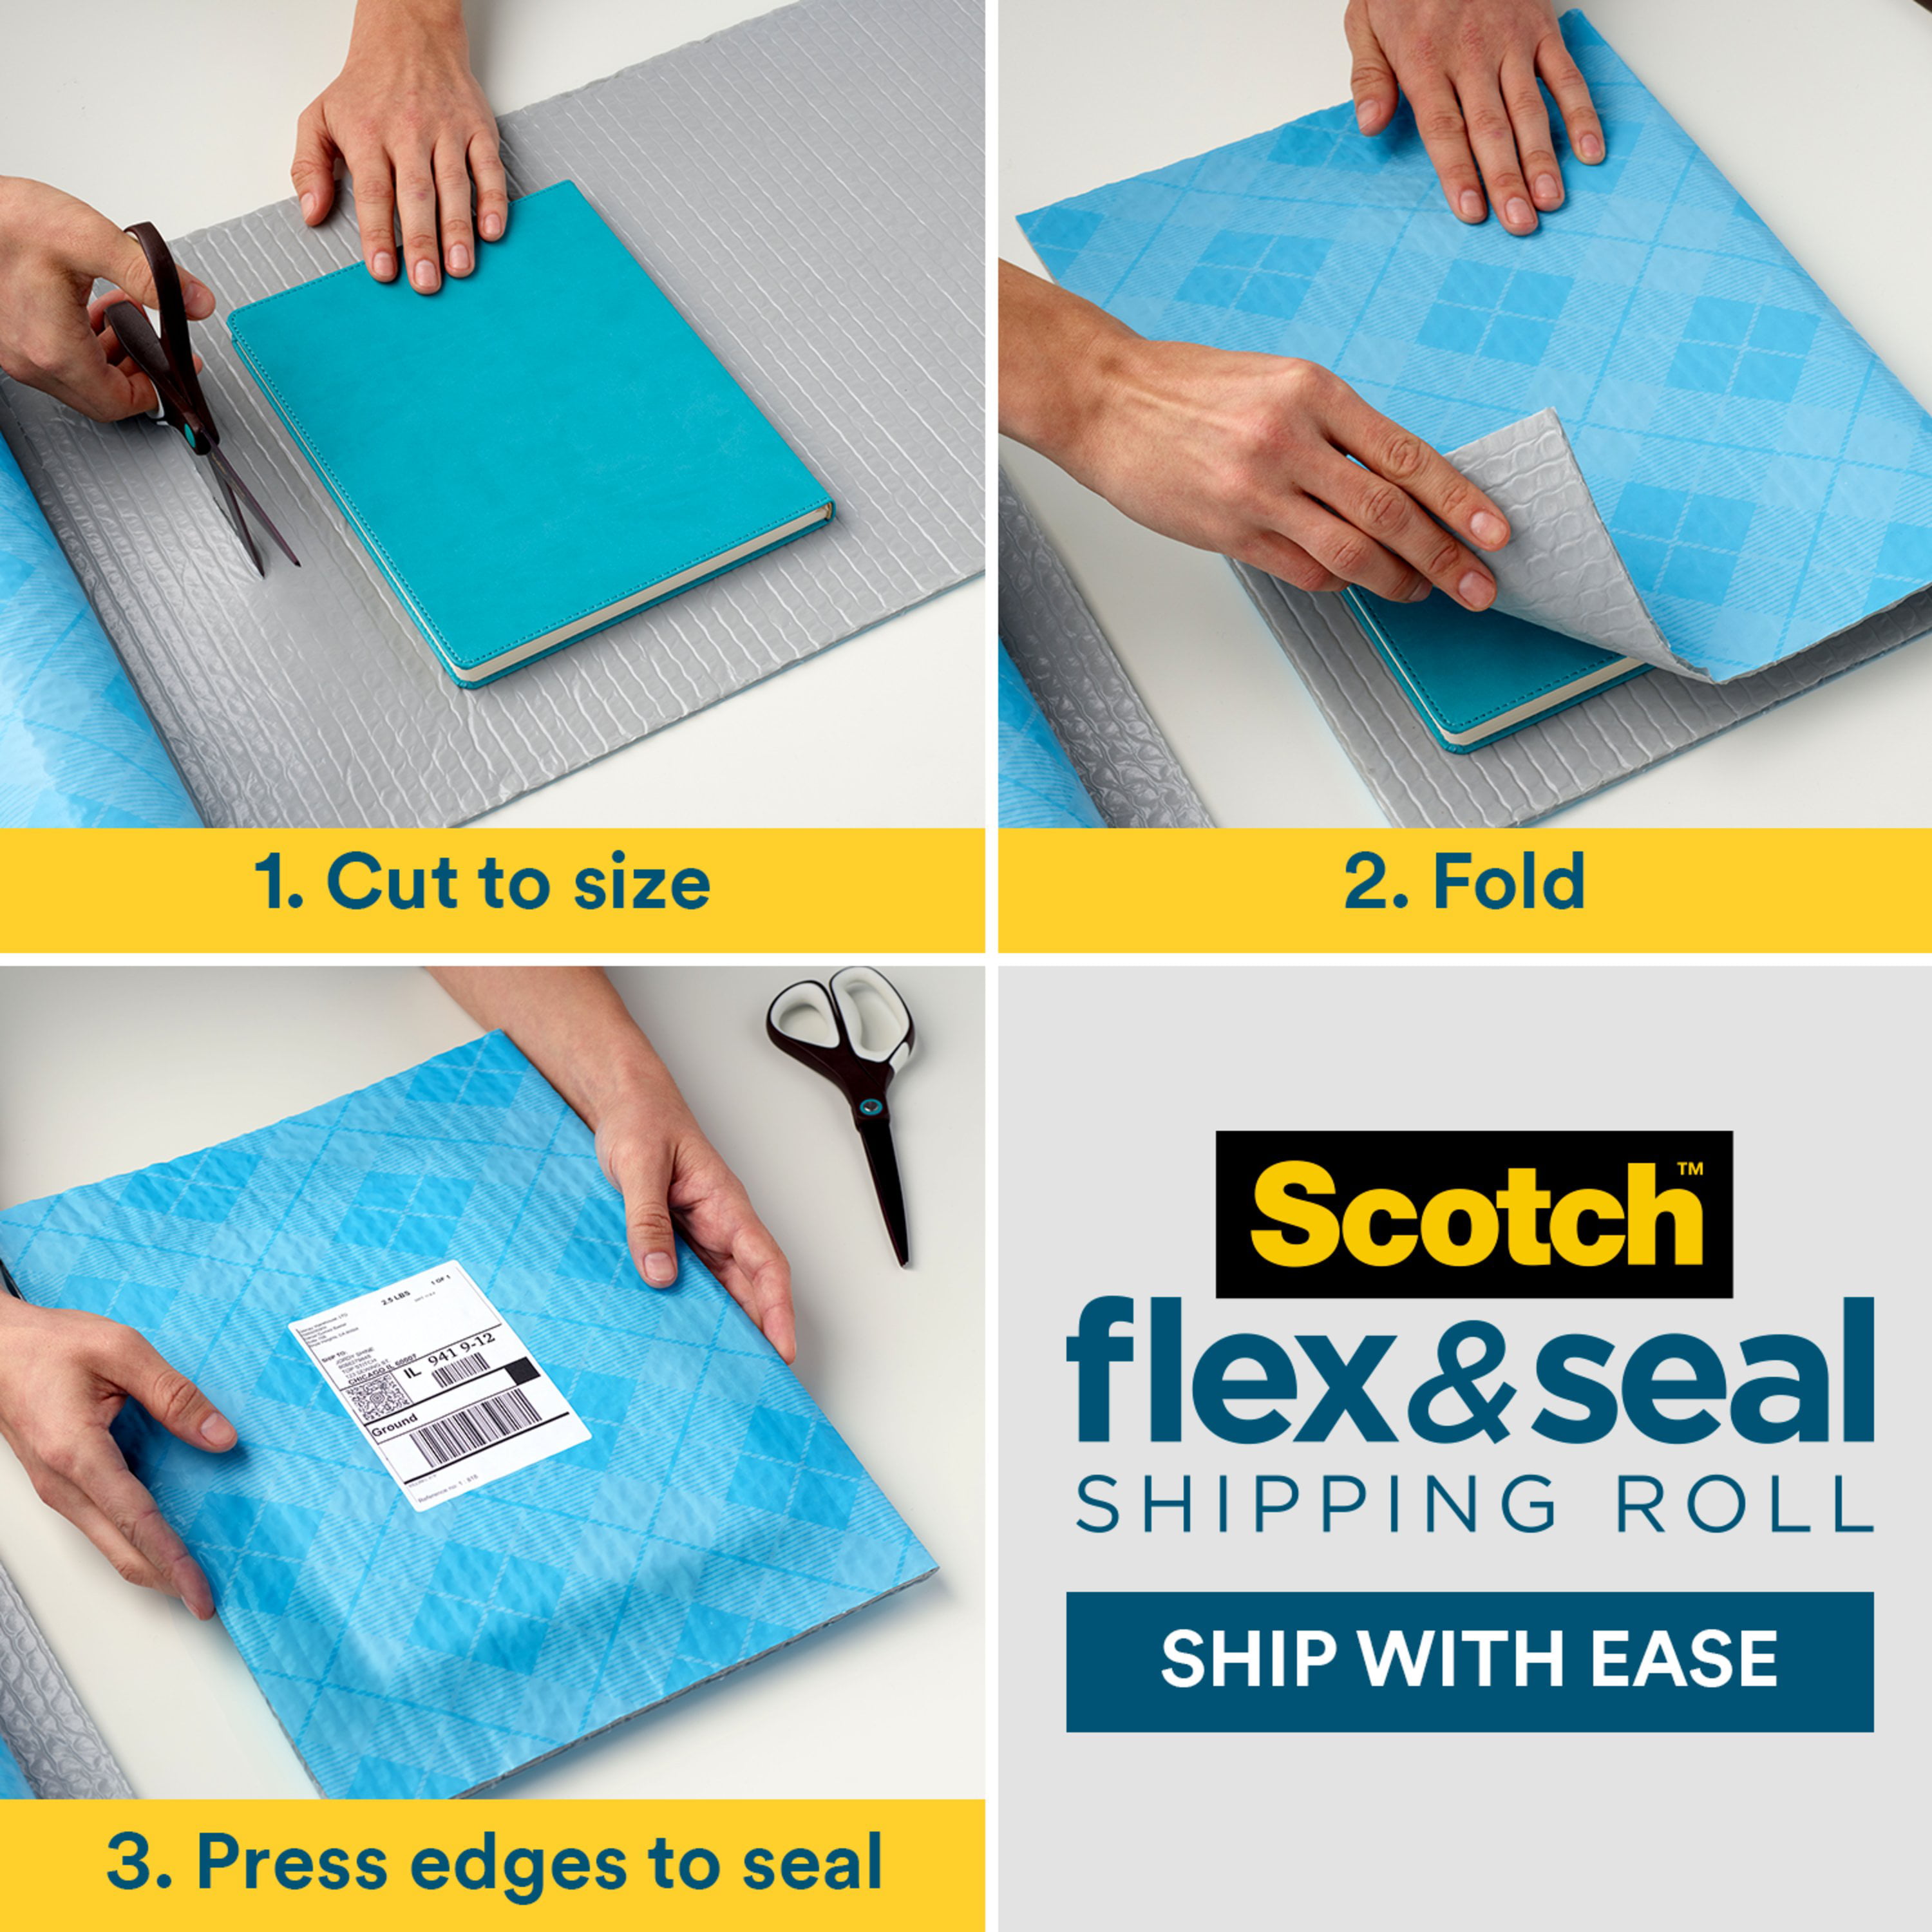 Flex and Seal Shipping Roll 50 ft x 15 in Padded Envelopes Just Ship It No Tape No Boxes Boxess Bubble Mailers Easy Packaging Alternative to Poly Mailers Shipping Bags